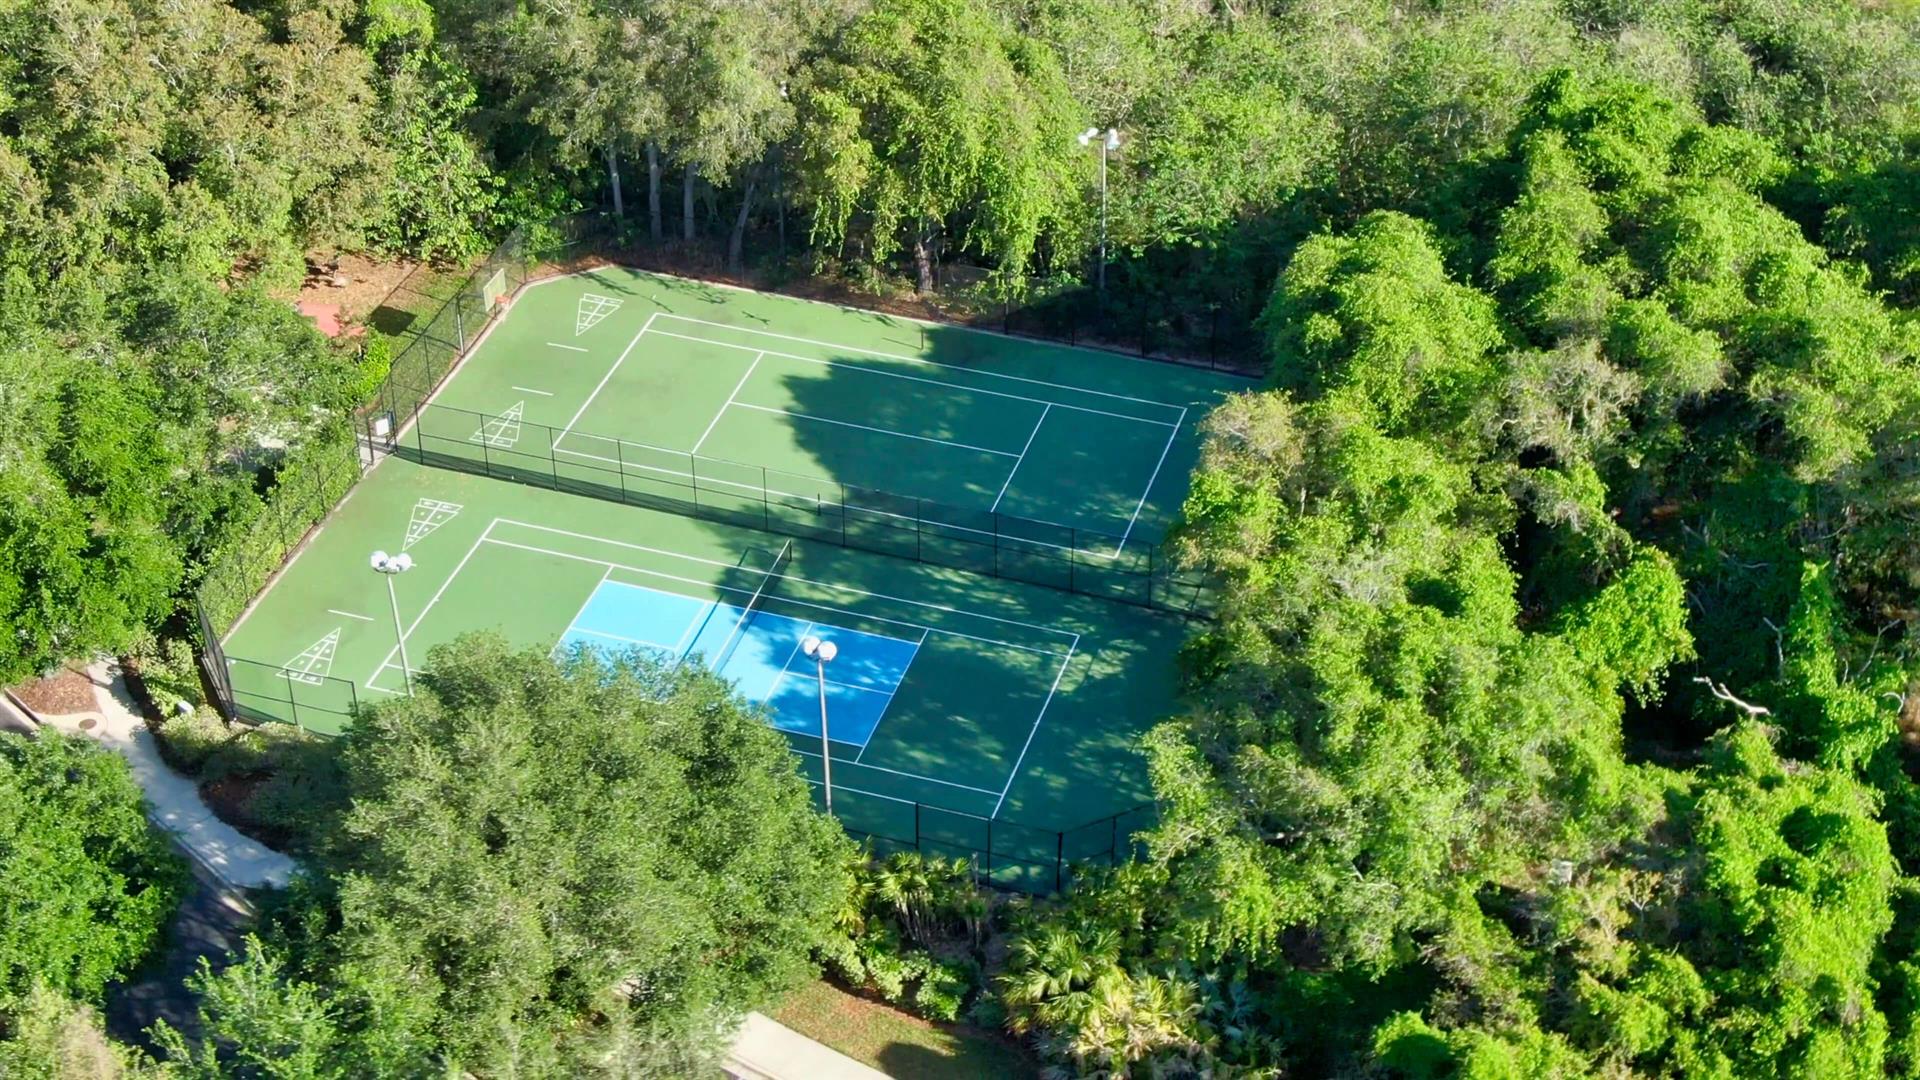 Emerald Island Resort
Tennis and Pickle Ball Courts